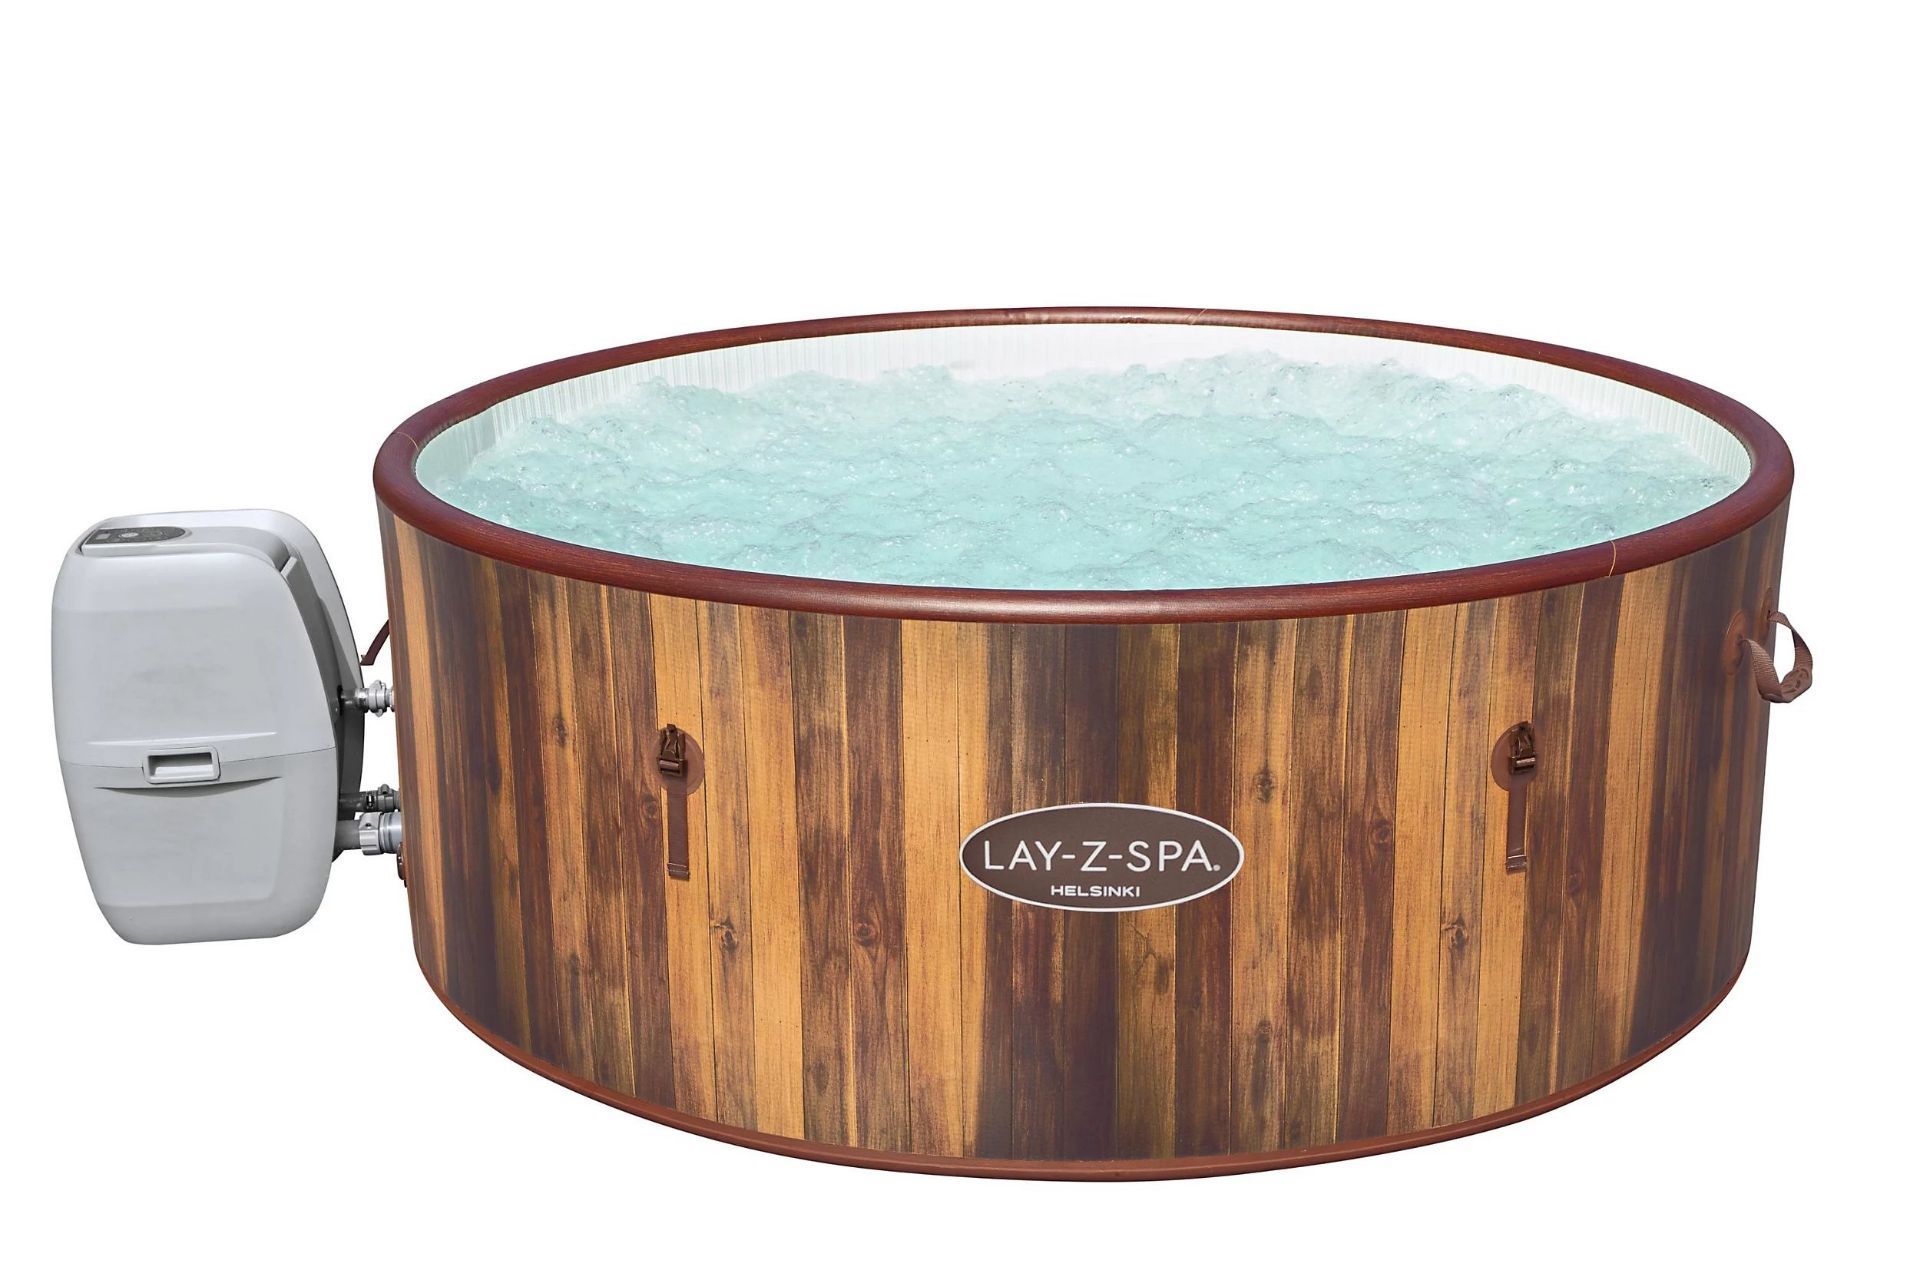 PALLET TO INCLUDE 3 X NEW & BOXED LAY-Z-SPA Helsinki 7 Person Hot Tub. RRP £919.99. This Nordic